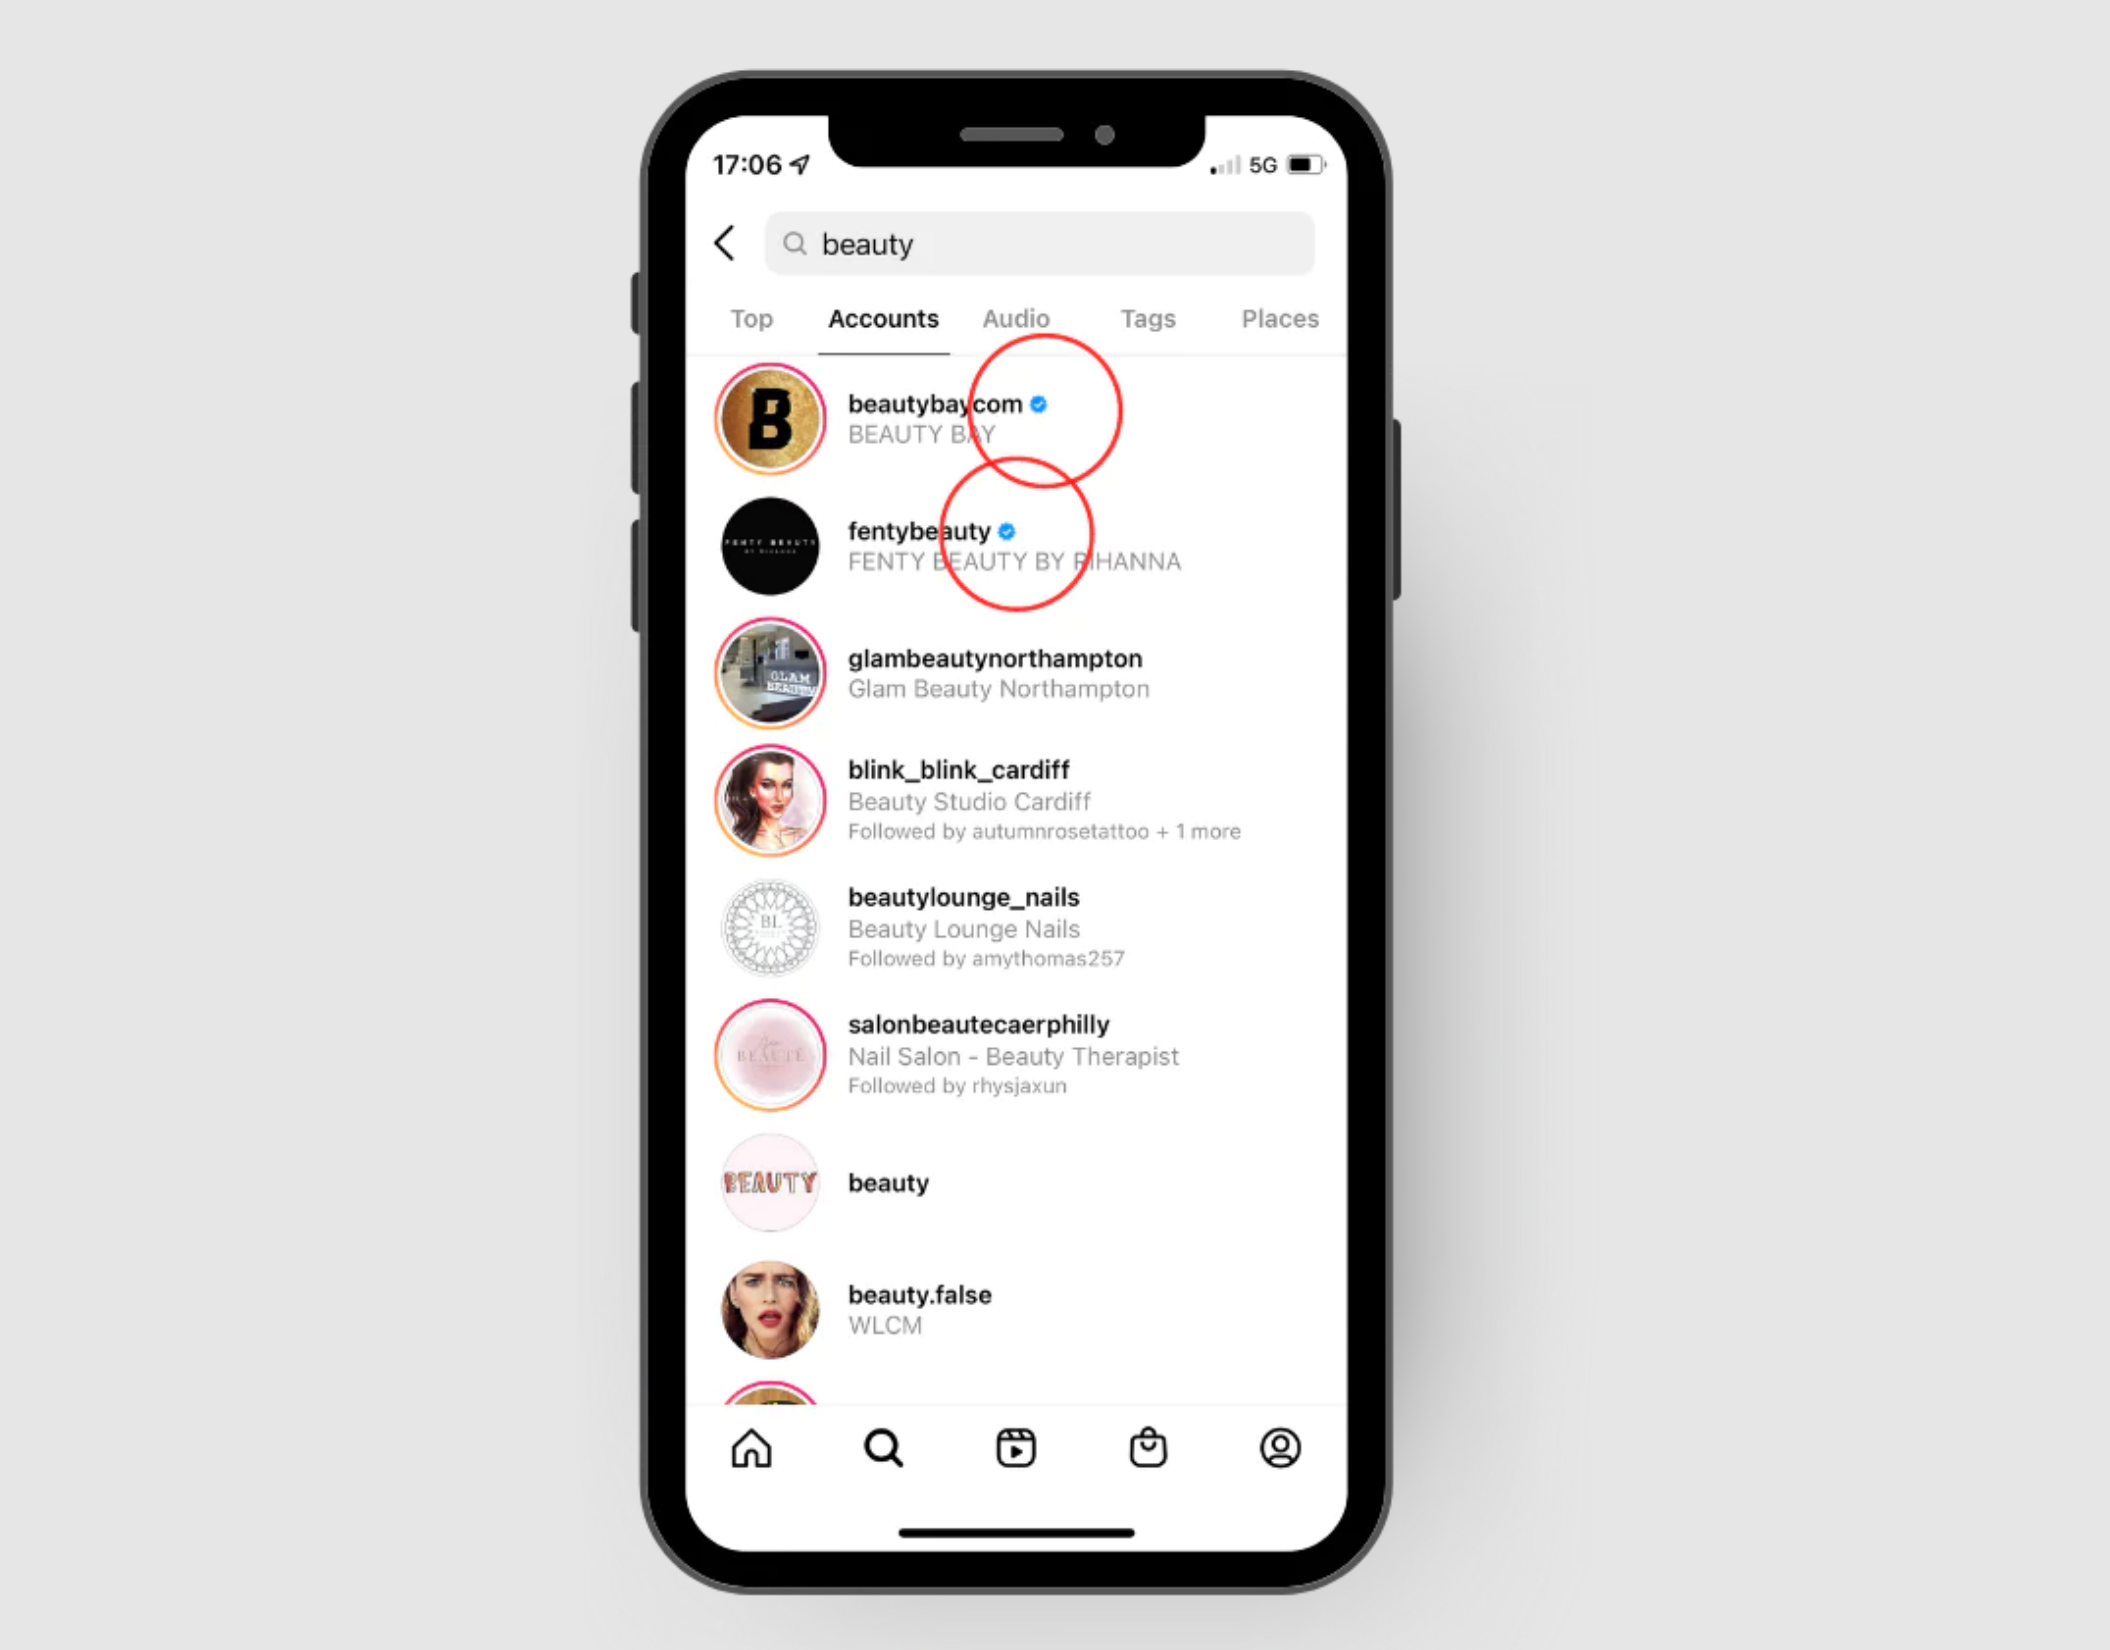 Verified Instagram accounts with blue check showing higher on search results